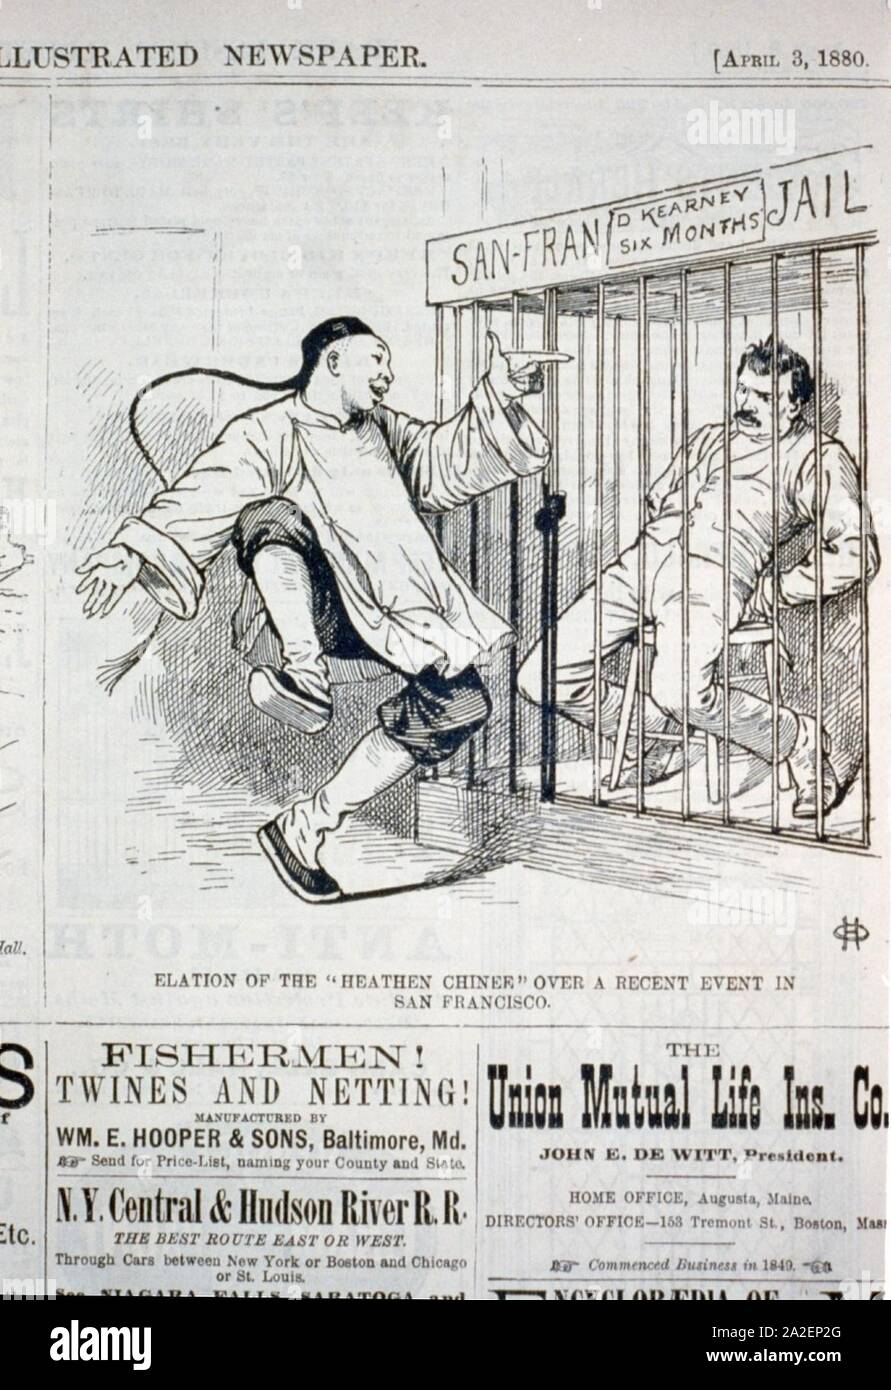 Elation of the ‘heathen Chinee‘ over a recent event in San Francisco (caricature of a Chinese man pointing and laughing at Denis Kearney in San Francisco jail) Stock Photo